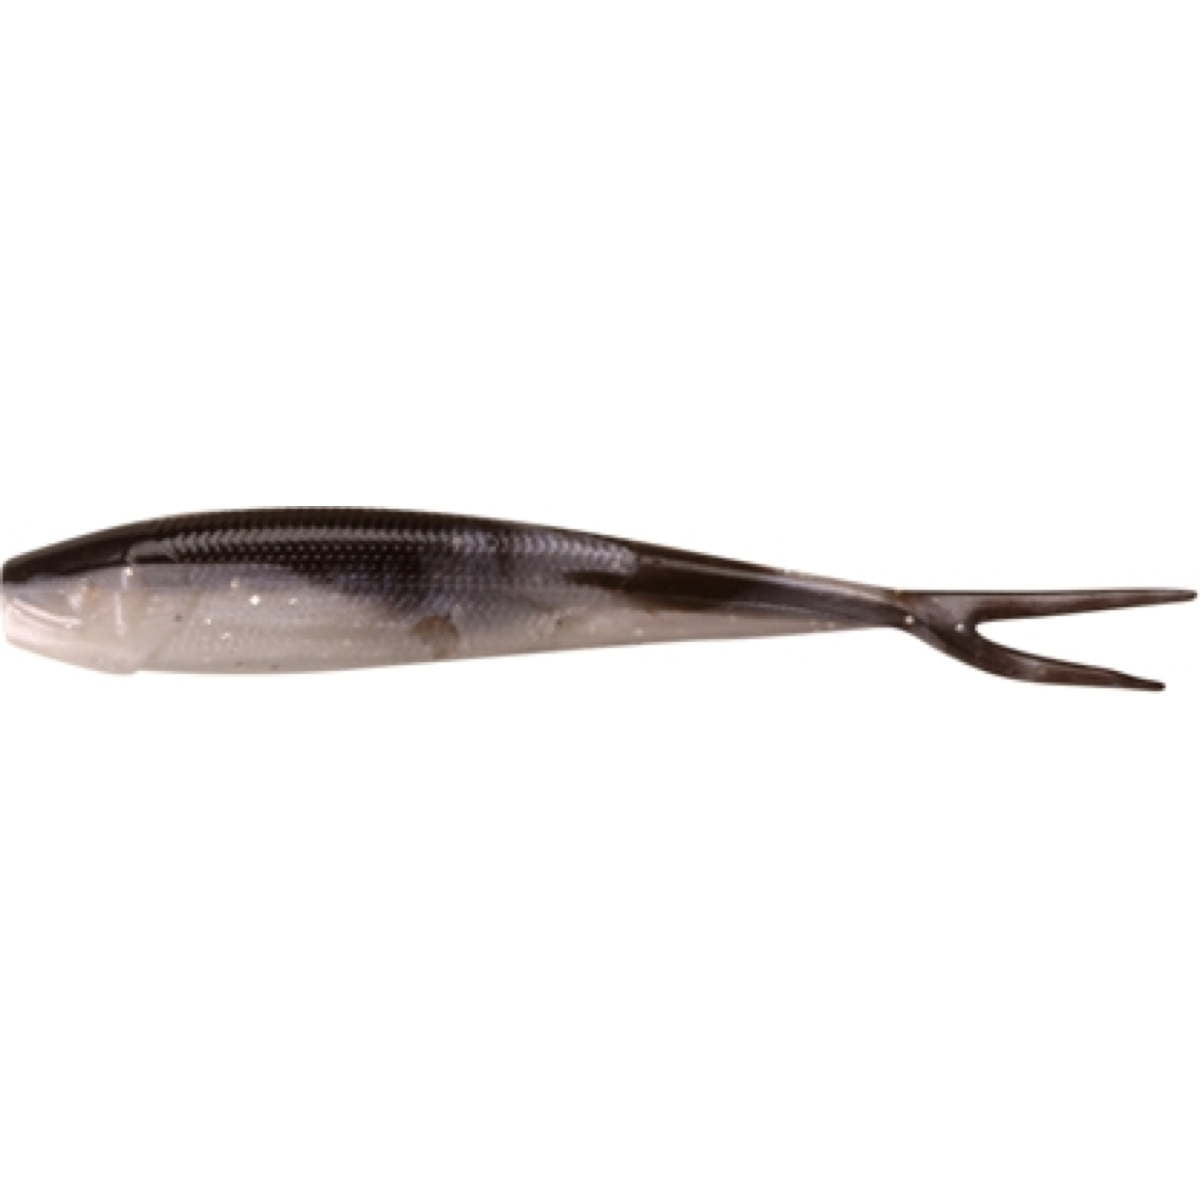 Photo of Berkley Gulp! Minnow for sale at United Tackle Shops.